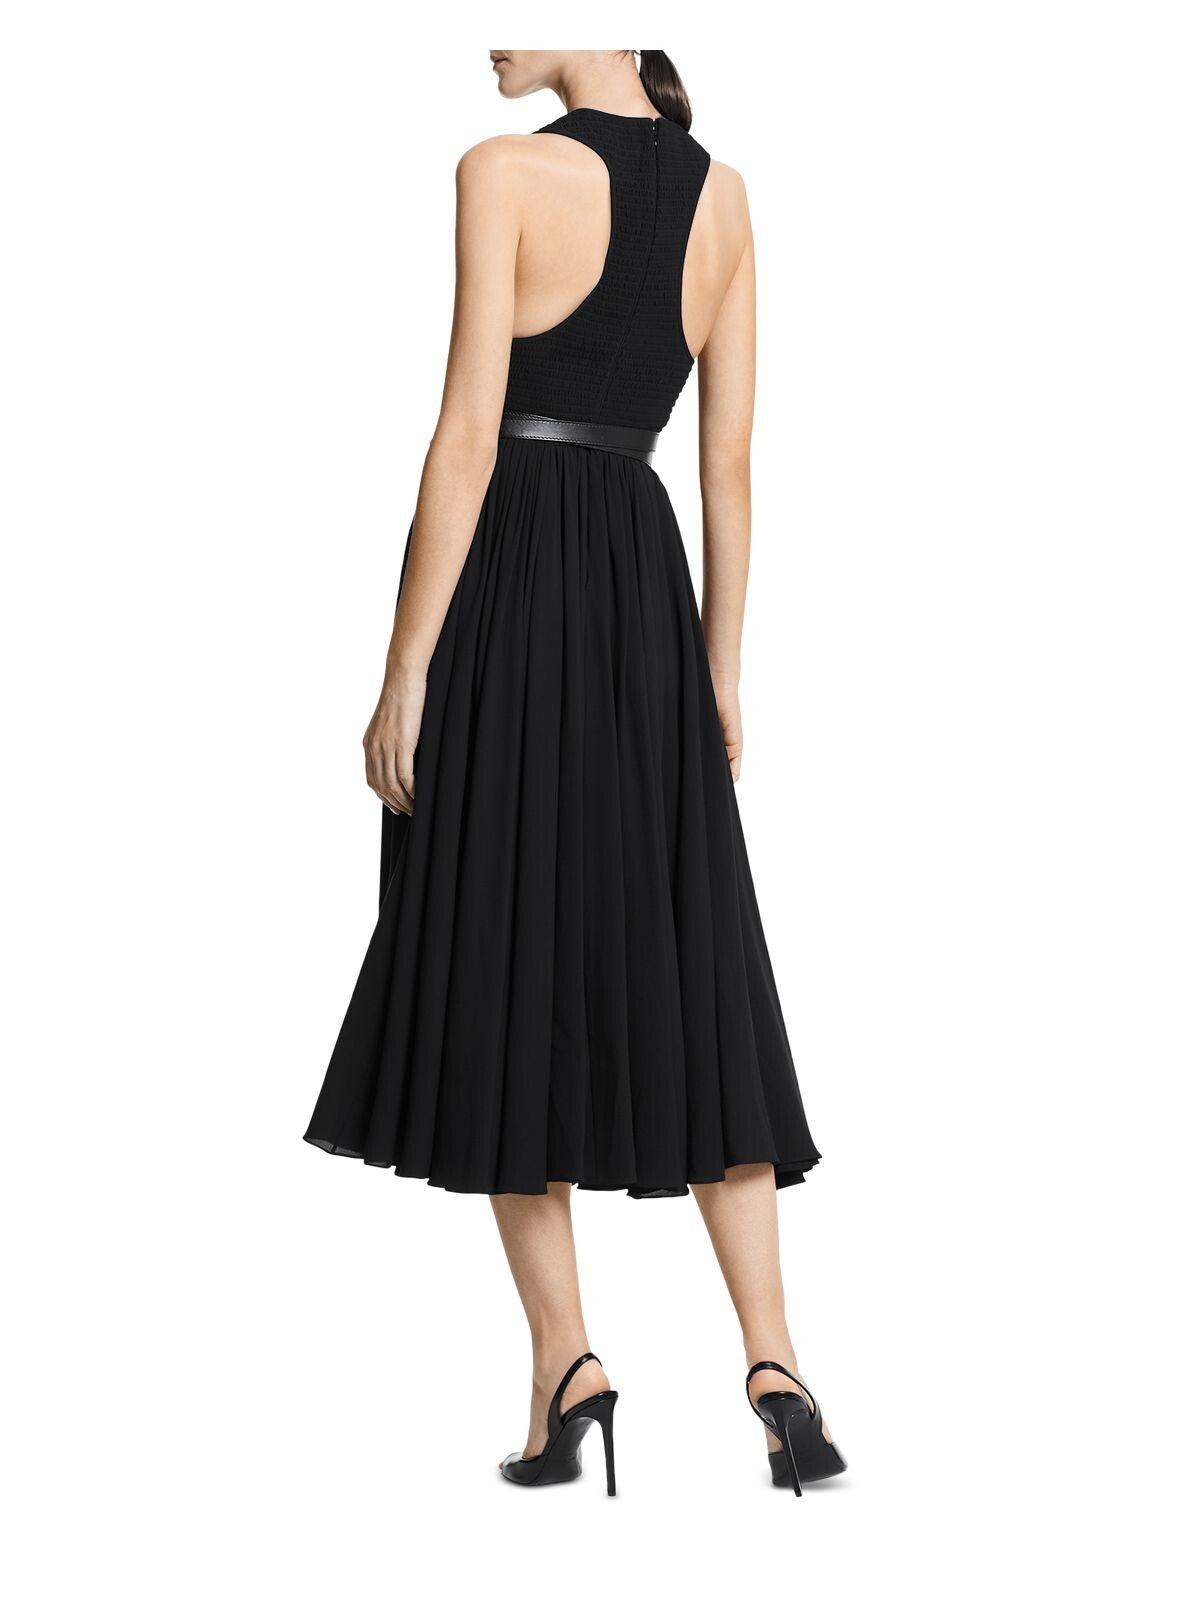 MICHAEL KORS Womens Black Zippered Racerback Smocked Attached Buckle Belt Sleeveless Scoop Neck Midi Party Fit + Flare Dress 8